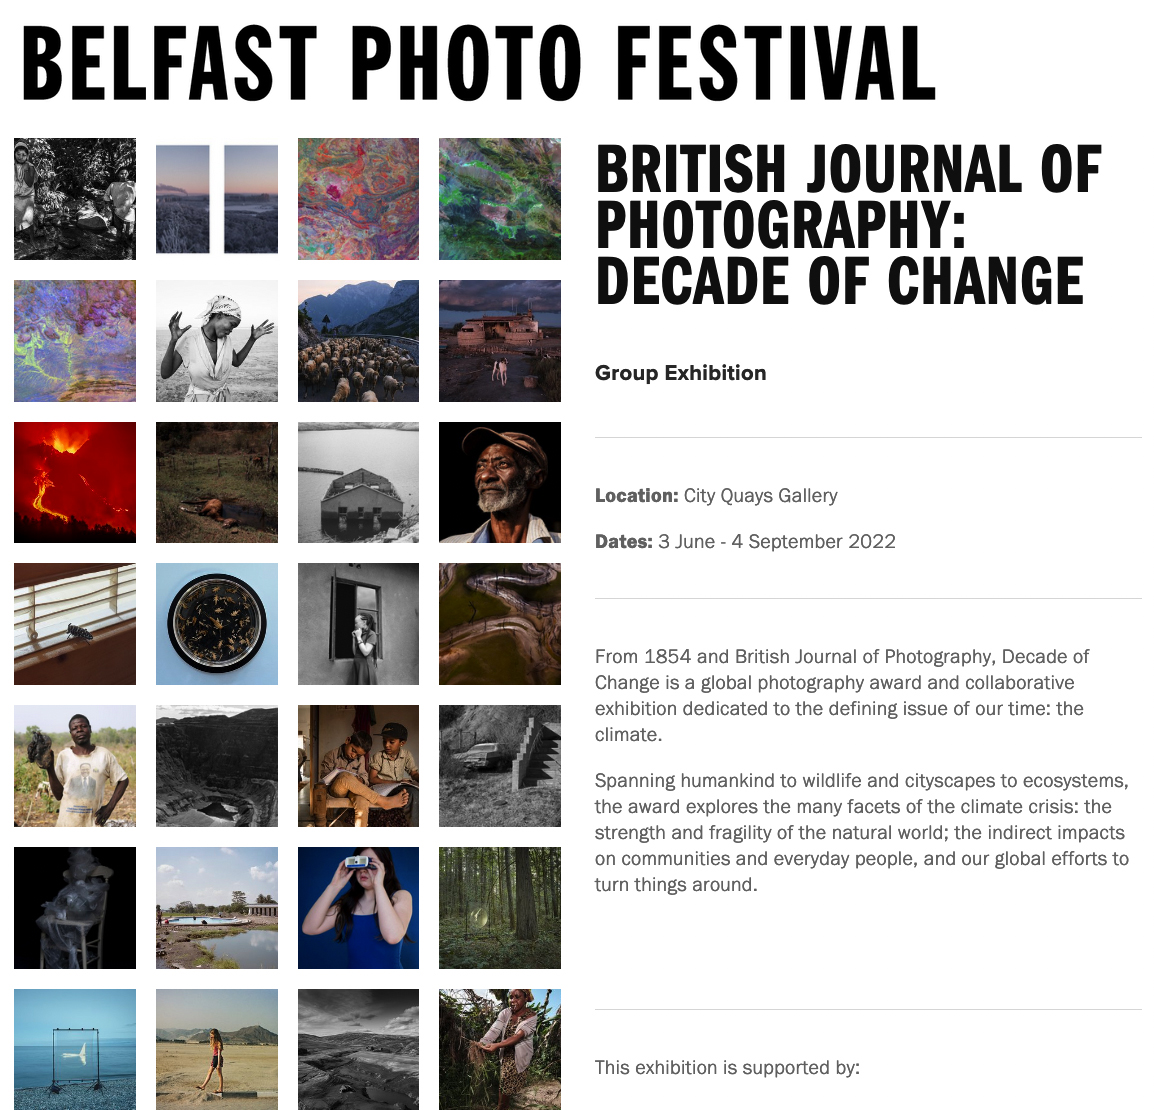 Decade-of-Change-at-Belfast-Photo-Fest